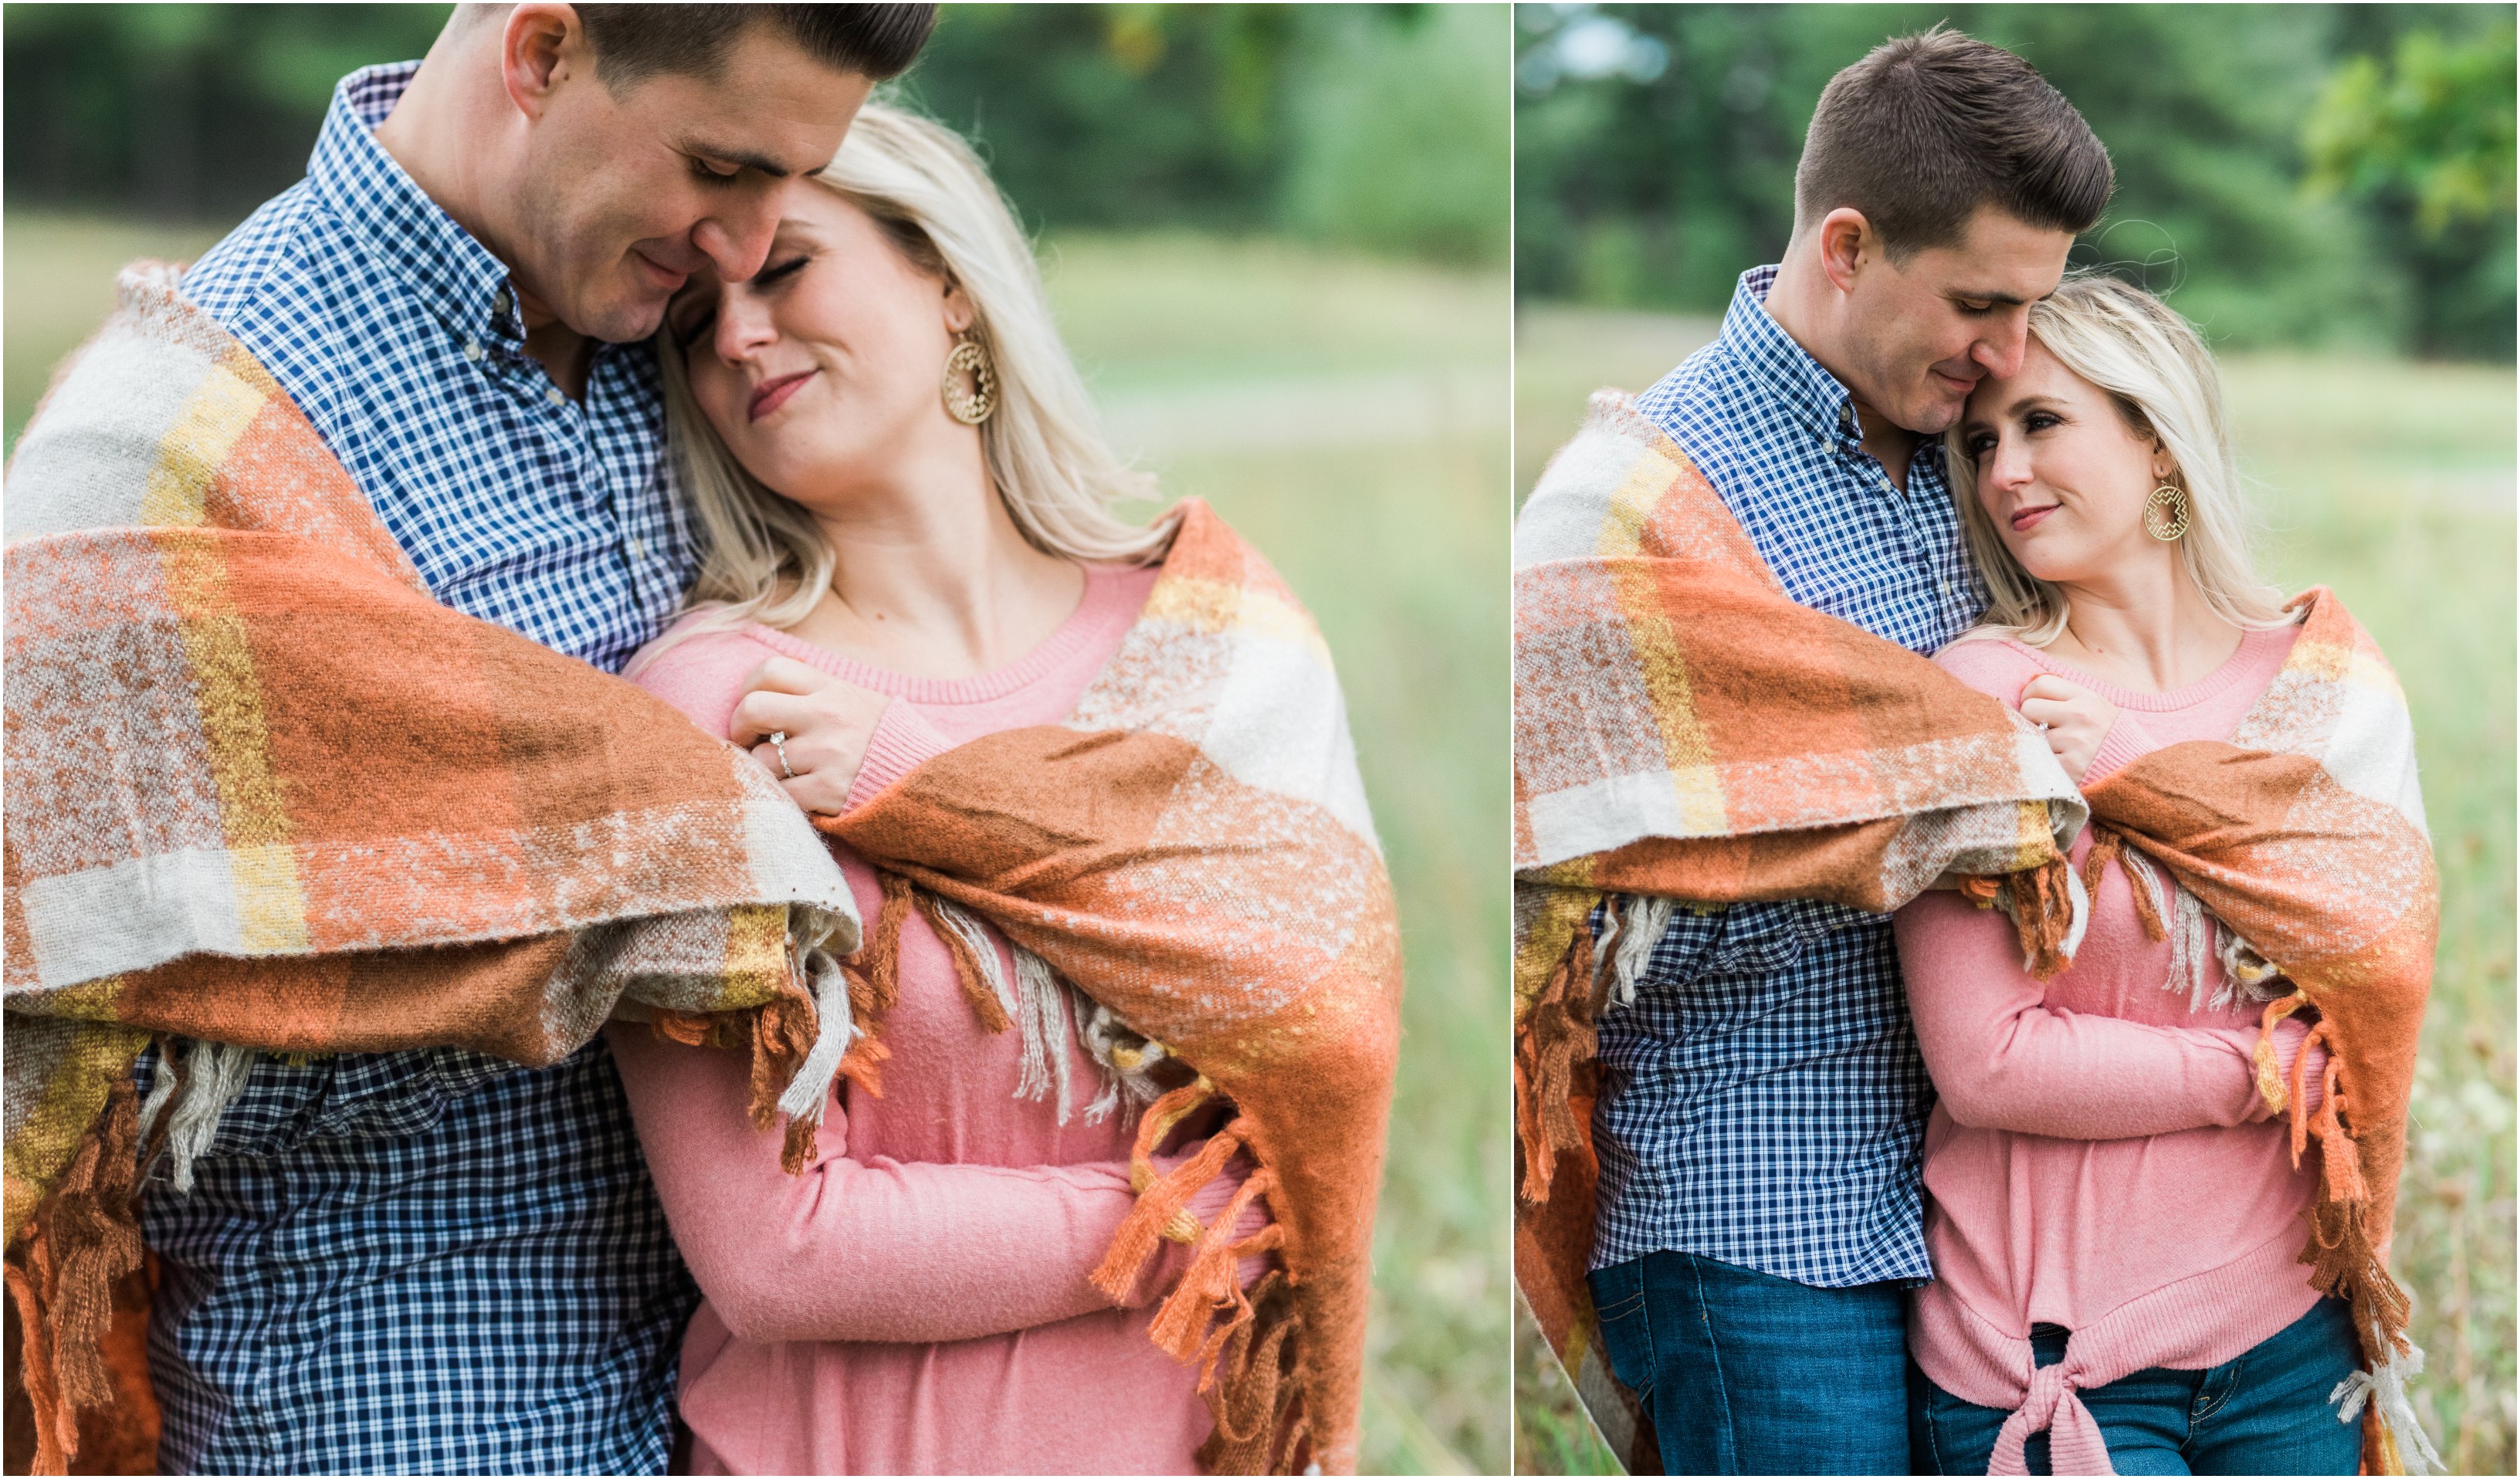 engagement photography for the outdoor bride, outdoor engagement photos, up north michigan engagement session, engagement session taken in northern michigan, fall engagement photography, engagement photo inspiration, fall couple photo inspiration, couple photo inspiration for the fall